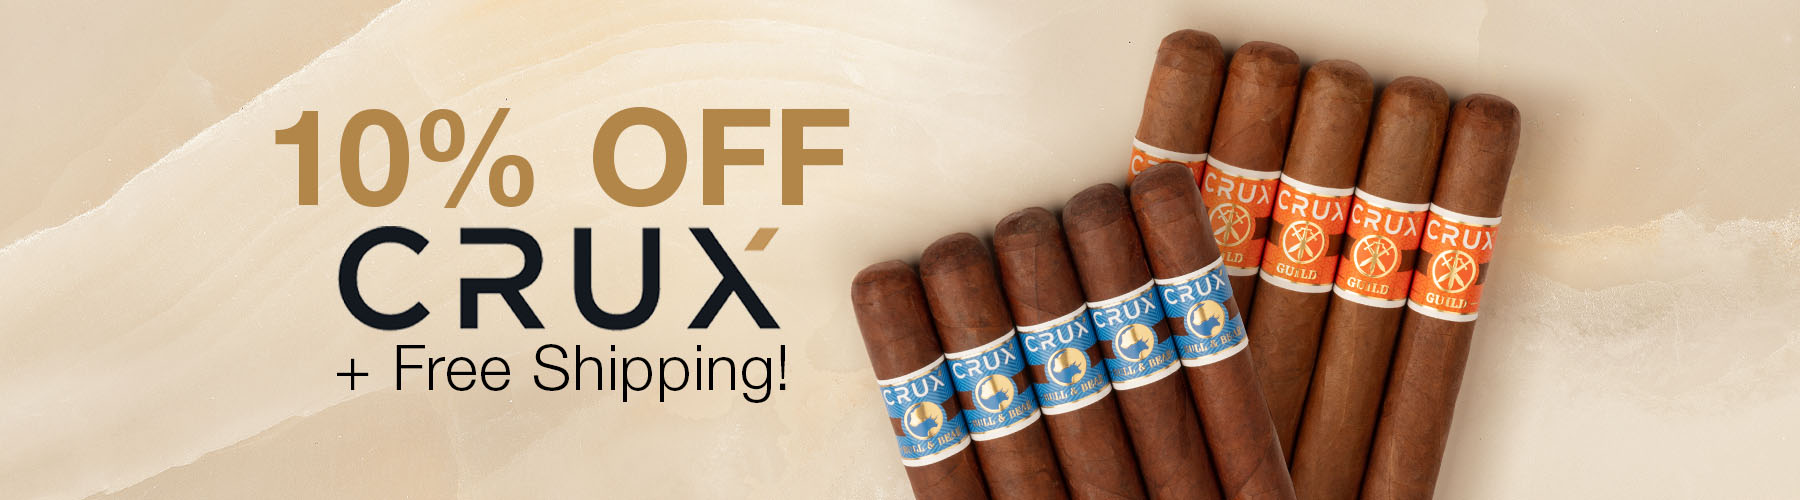 10% off Crux + Free Shipping!